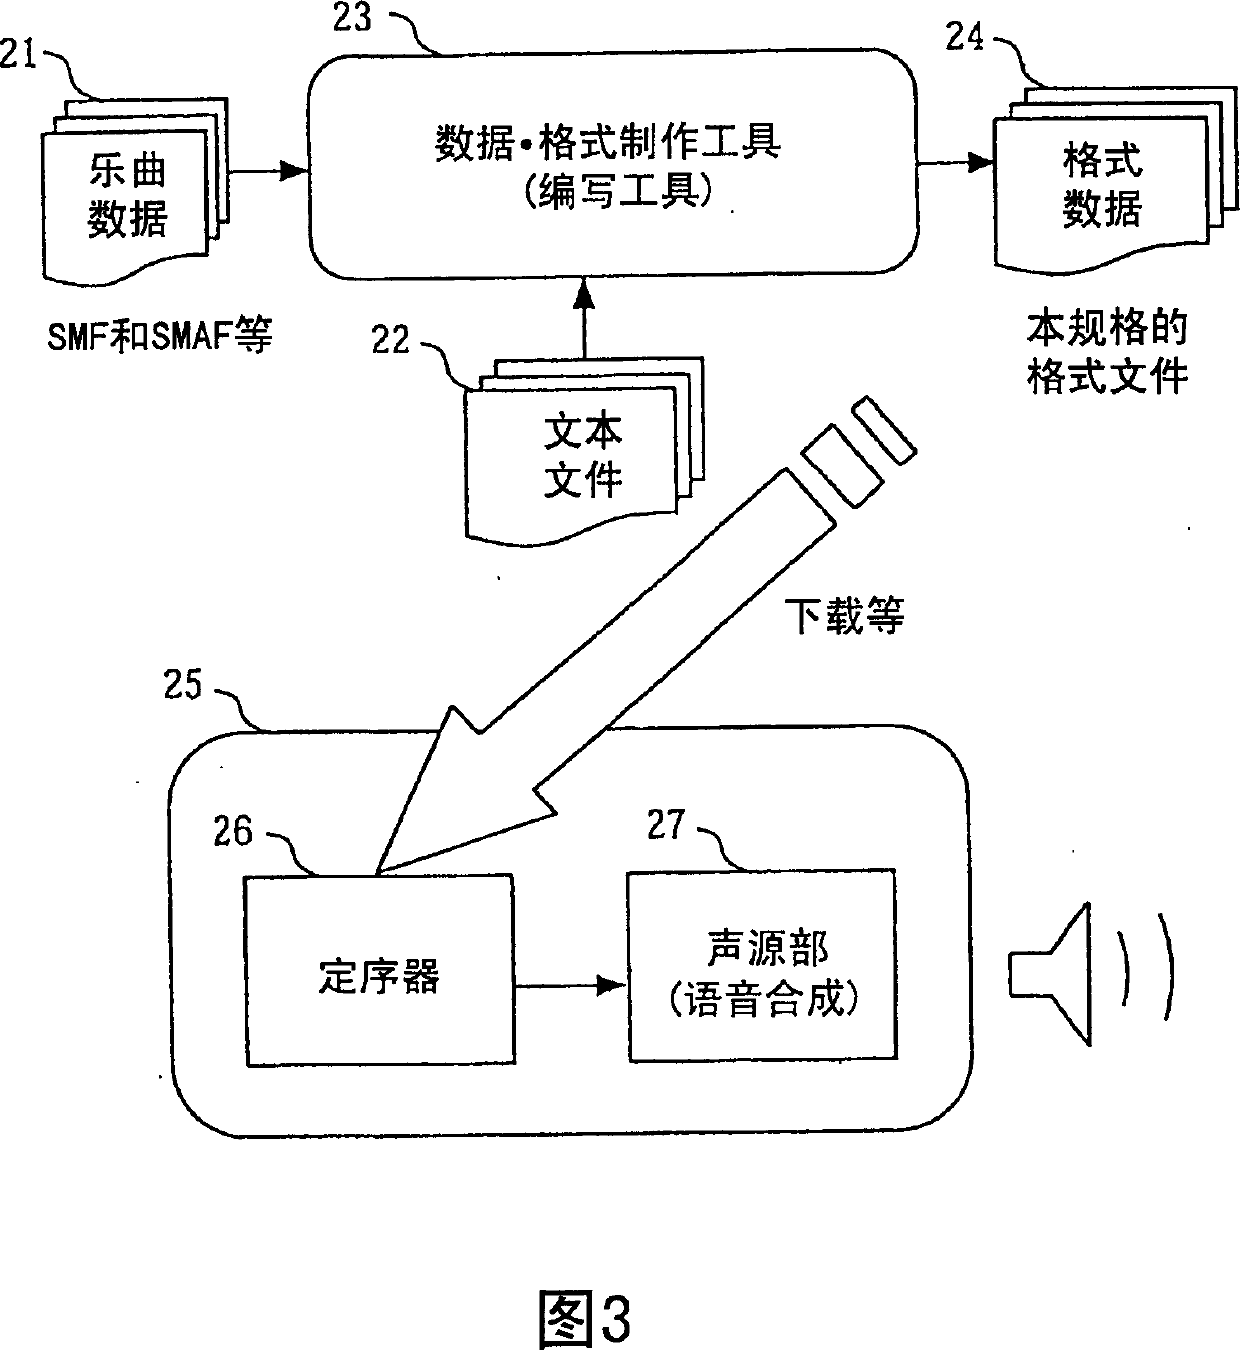 Musical voice reproducing device and control method, and server device thereof